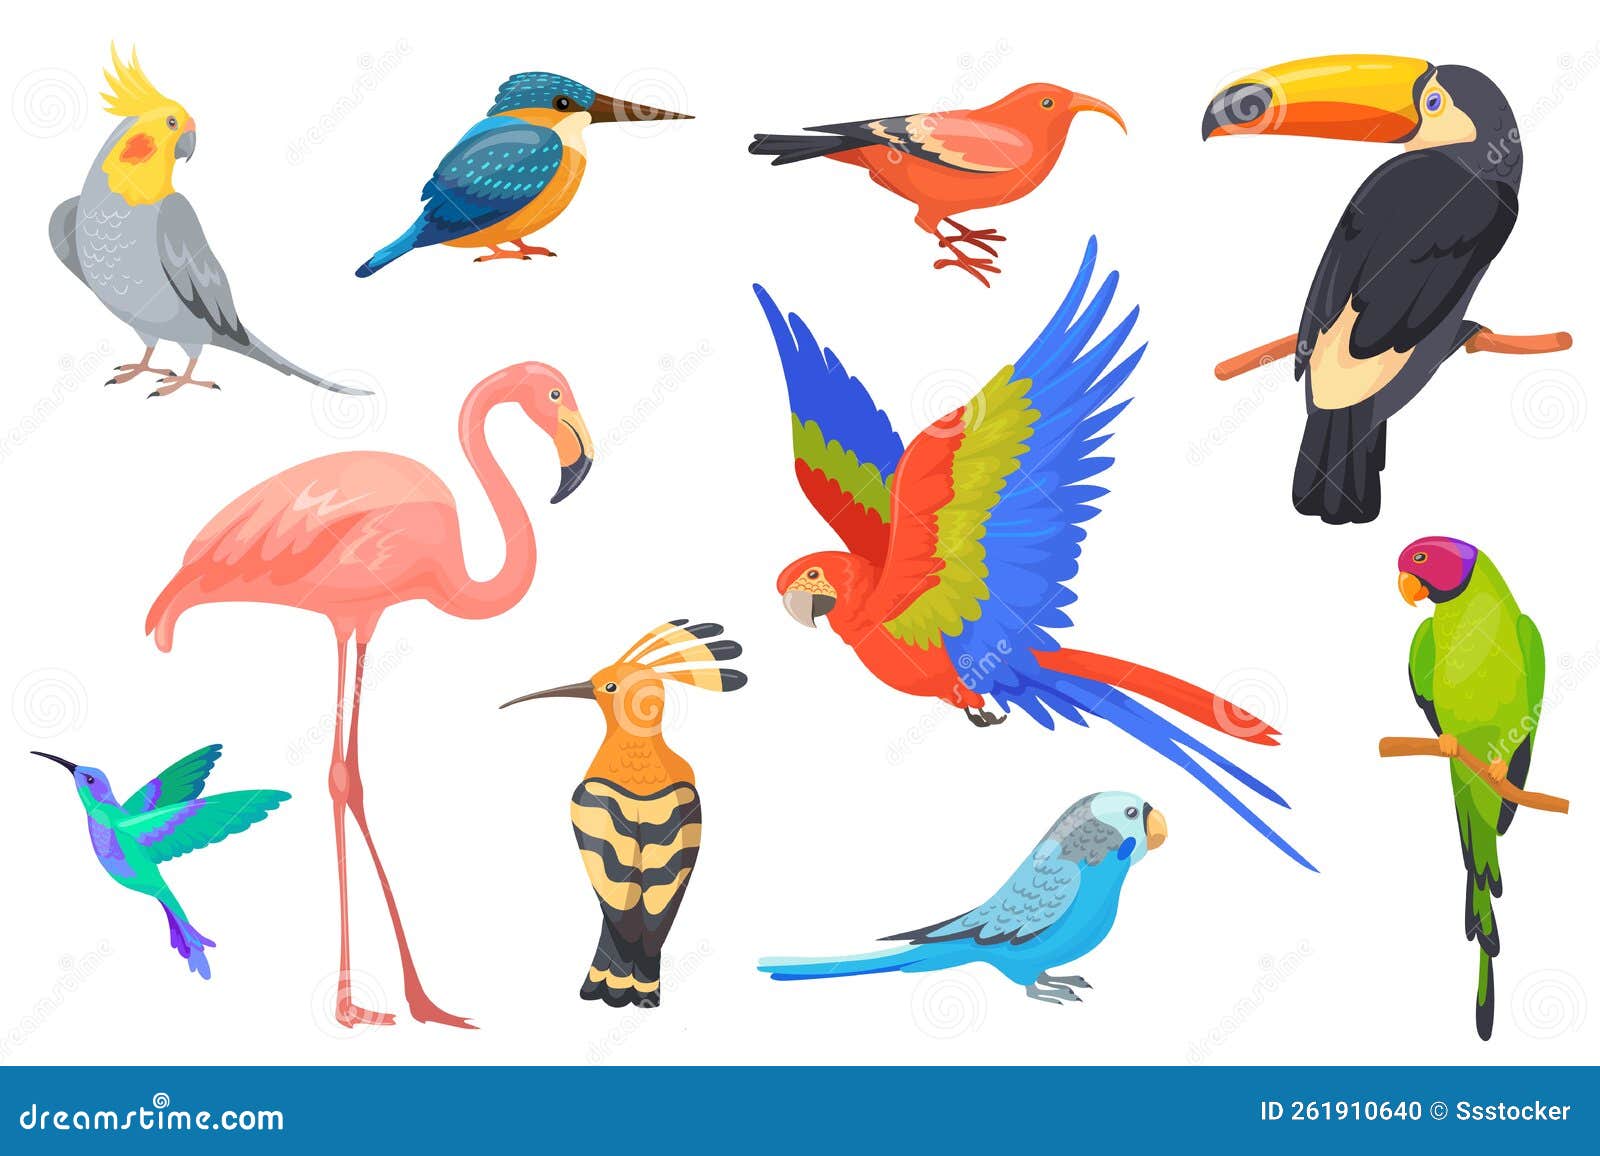 Wildlife Hawaiian Birds. Exotic Beauty Bird of Tropical Paradise Jungle  Brazil or Colombia, Macaw Parakeet Toucan Stock Vector - Illustration of  colorful, bright: 261910640